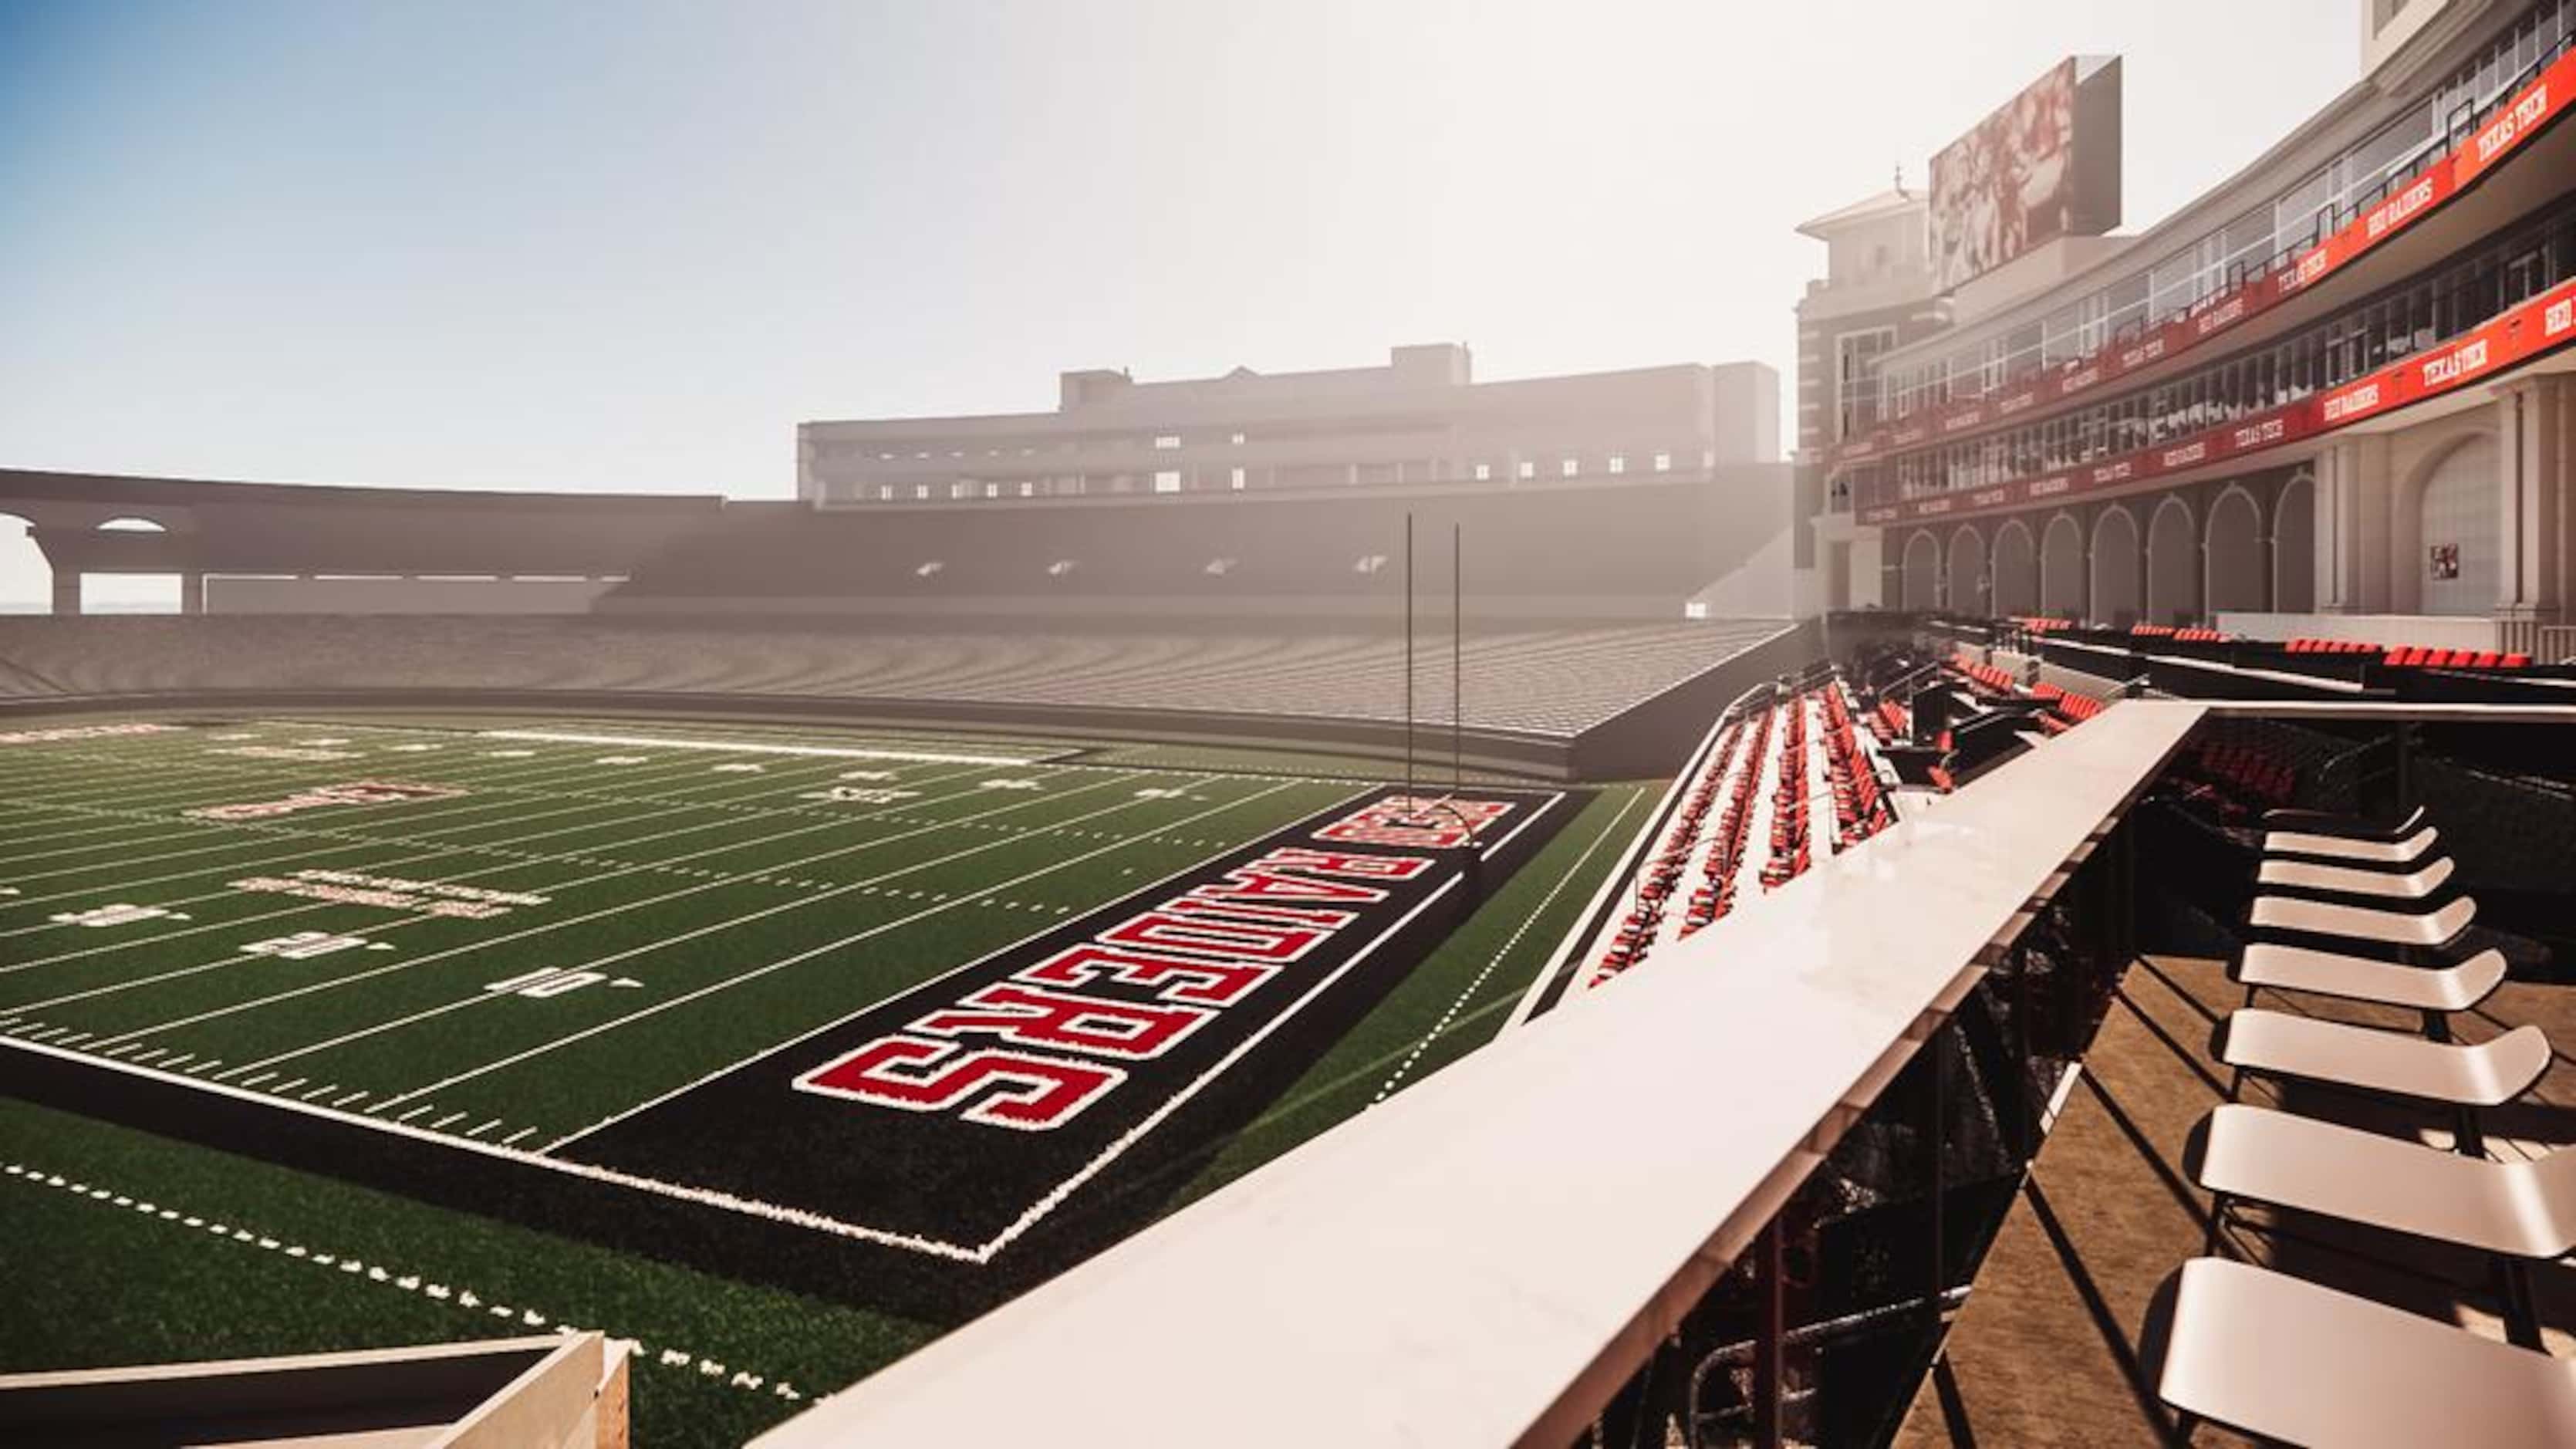 Rendering of the new south end zone at Jones AT&T Stadium. (Courtesy of Texas Tech Athletics)